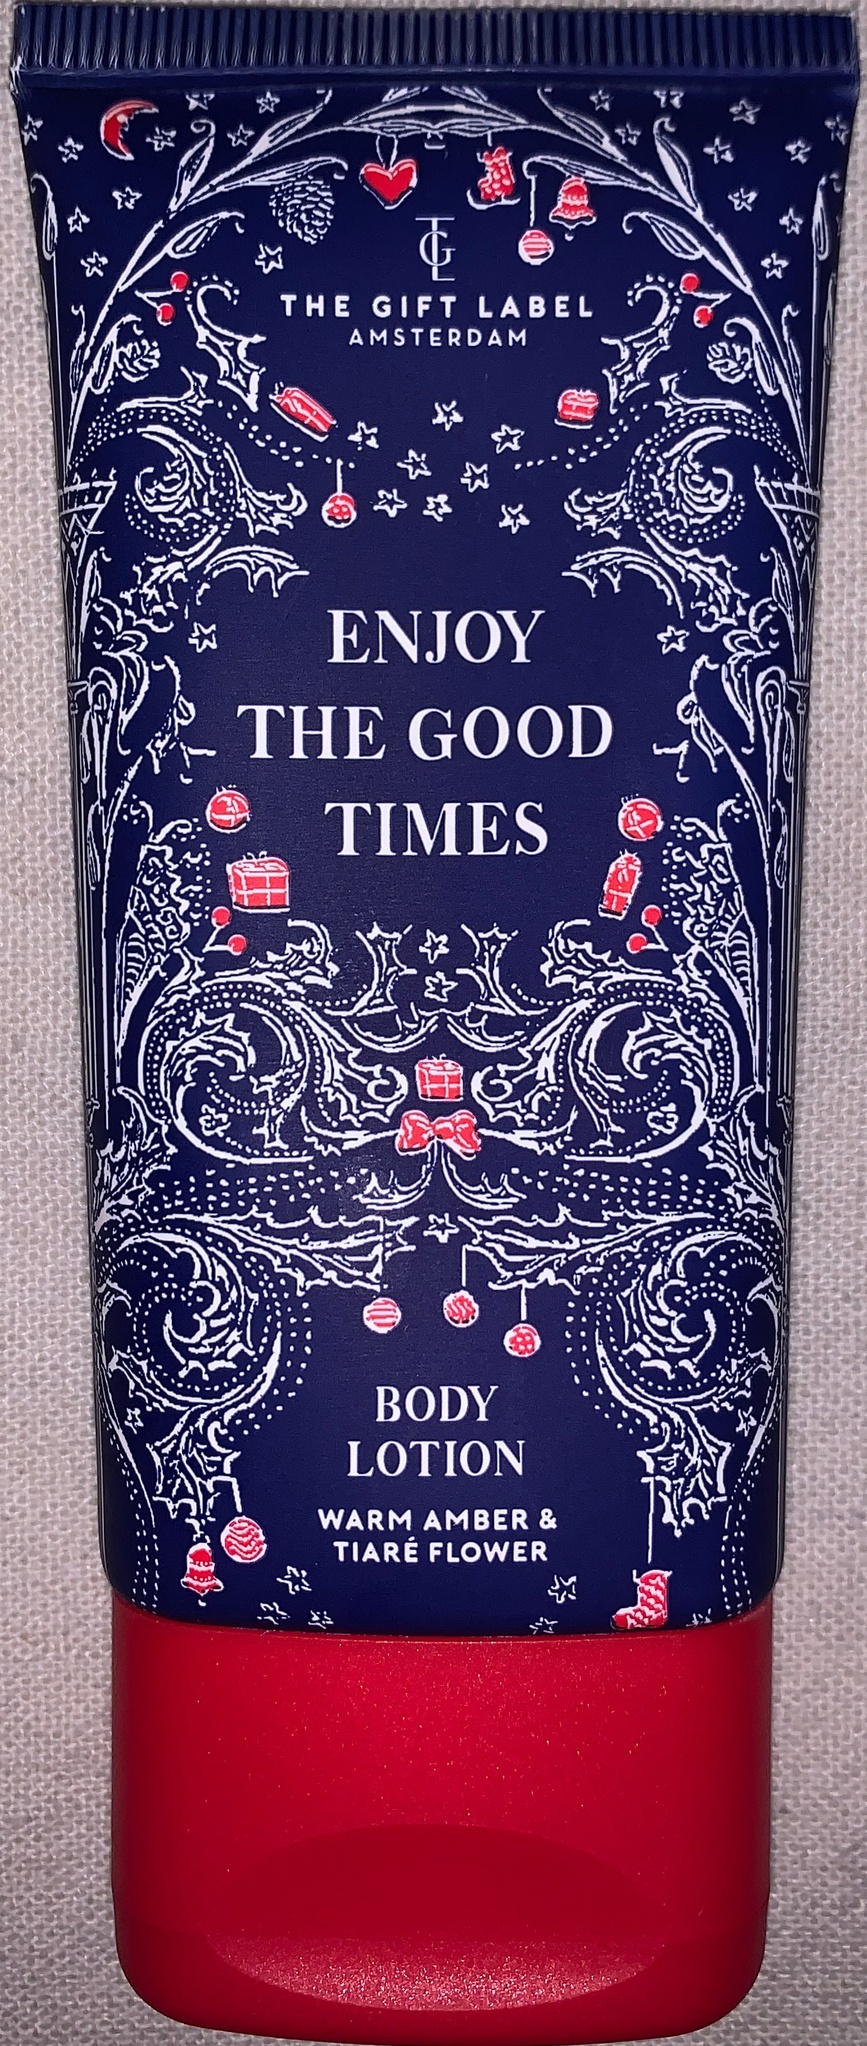 The Gift Label Enjoy The Good Times Body Lotion